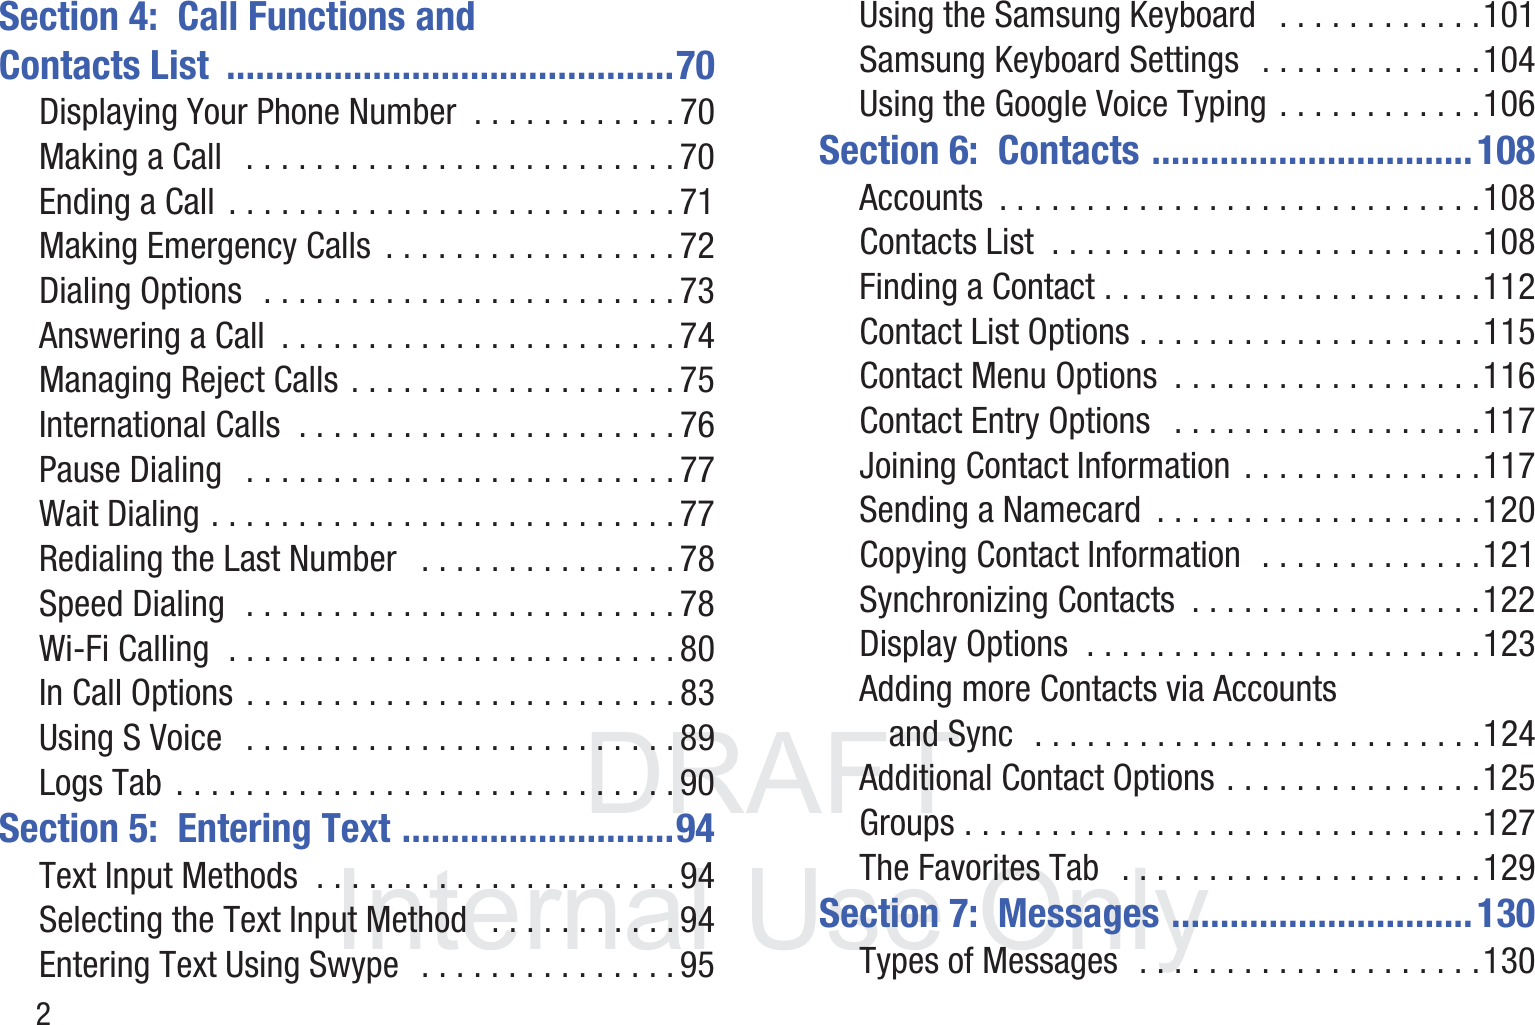 DRAFT InternalUse Only2Section 4:  Call Functions and Contacts List  ..............................................70Displaying Your Phone Number  . . . . . . . . . . . . 70Making a Call   . . . . . . . . . . . . . . . . . . . . . . . . . 70Ending a Call  . . . . . . . . . . . . . . . . . . . . . . . . . . 71Making Emergency Calls  . . . . . . . . . . . . . . . . . 72Dialing Options  . . . . . . . . . . . . . . . . . . . . . . . . 73Answering a Call  . . . . . . . . . . . . . . . . . . . . . . . 74Managing Reject Calls . . . . . . . . . . . . . . . . . . . 75International Calls  . . . . . . . . . . . . . . . . . . . . . . 76Pause Dialing   . . . . . . . . . . . . . . . . . . . . . . . . . 77Wait Dialing . . . . . . . . . . . . . . . . . . . . . . . . . . . 77Redialing the Last Number   . . . . . . . . . . . . . . . 78Speed Dialing  . . . . . . . . . . . . . . . . . . . . . . . . . 78Wi-Fi Calling  . . . . . . . . . . . . . . . . . . . . . . . . . . 80In Call Options . . . . . . . . . . . . . . . . . . . . . . . . . 83Using S Voice   . . . . . . . . . . . . . . . . . . . . . . . . . 89Logs Tab  . . . . . . . . . . . . . . . . . . . . . . . . . . . . . 90Section 5:  Entering Text ............................94Text Input Methods  . . . . . . . . . . . . . . . . . . . . . 94Selecting the Text Input Method   . . . . . . . . . . . 94Entering Text Using Swype  . . . . . . . . . . . . . . . 95Using the Samsung Keyboard   . . . . . . . . . . . .101Samsung Keyboard Settings   . . . . . . . . . . . . .104Using the Google Voice Typing . . . . . . . . . . . .106Section 6:  Contacts .................................108Accounts  . . . . . . . . . . . . . . . . . . . . . . . . . . . .108Contacts List  . . . . . . . . . . . . . . . . . . . . . . . . .108Finding a Contact . . . . . . . . . . . . . . . . . . . . . .112Contact List Options . . . . . . . . . . . . . . . . . . . .115Contact Menu Options  . . . . . . . . . . . . . . . . . .116Contact Entry Options   . . . . . . . . . . . . . . . . . .117Joining Contact Information  . . . . . . . . . . . . . .117Sending a Namecard  . . . . . . . . . . . . . . . . . . .120Copying Contact Information  . . . . . . . . . . . . .121Synchronizing Contacts  . . . . . . . . . . . . . . . . .122Display Options  . . . . . . . . . . . . . . . . . . . . . . .123Adding more Contacts via Accounts and Sync  . . . . . . . . . . . . . . . . . . . . . . . . . .124Additional Contact Options . . . . . . . . . . . . . . .125Groups . . . . . . . . . . . . . . . . . . . . . . . . . . . . . .127The Favorites Tab   . . . . . . . . . . . . . . . . . . . . .129Section 7:  Messages ...............................130Types of Messages  . . . . . . . . . . . . . . . . . . . .130